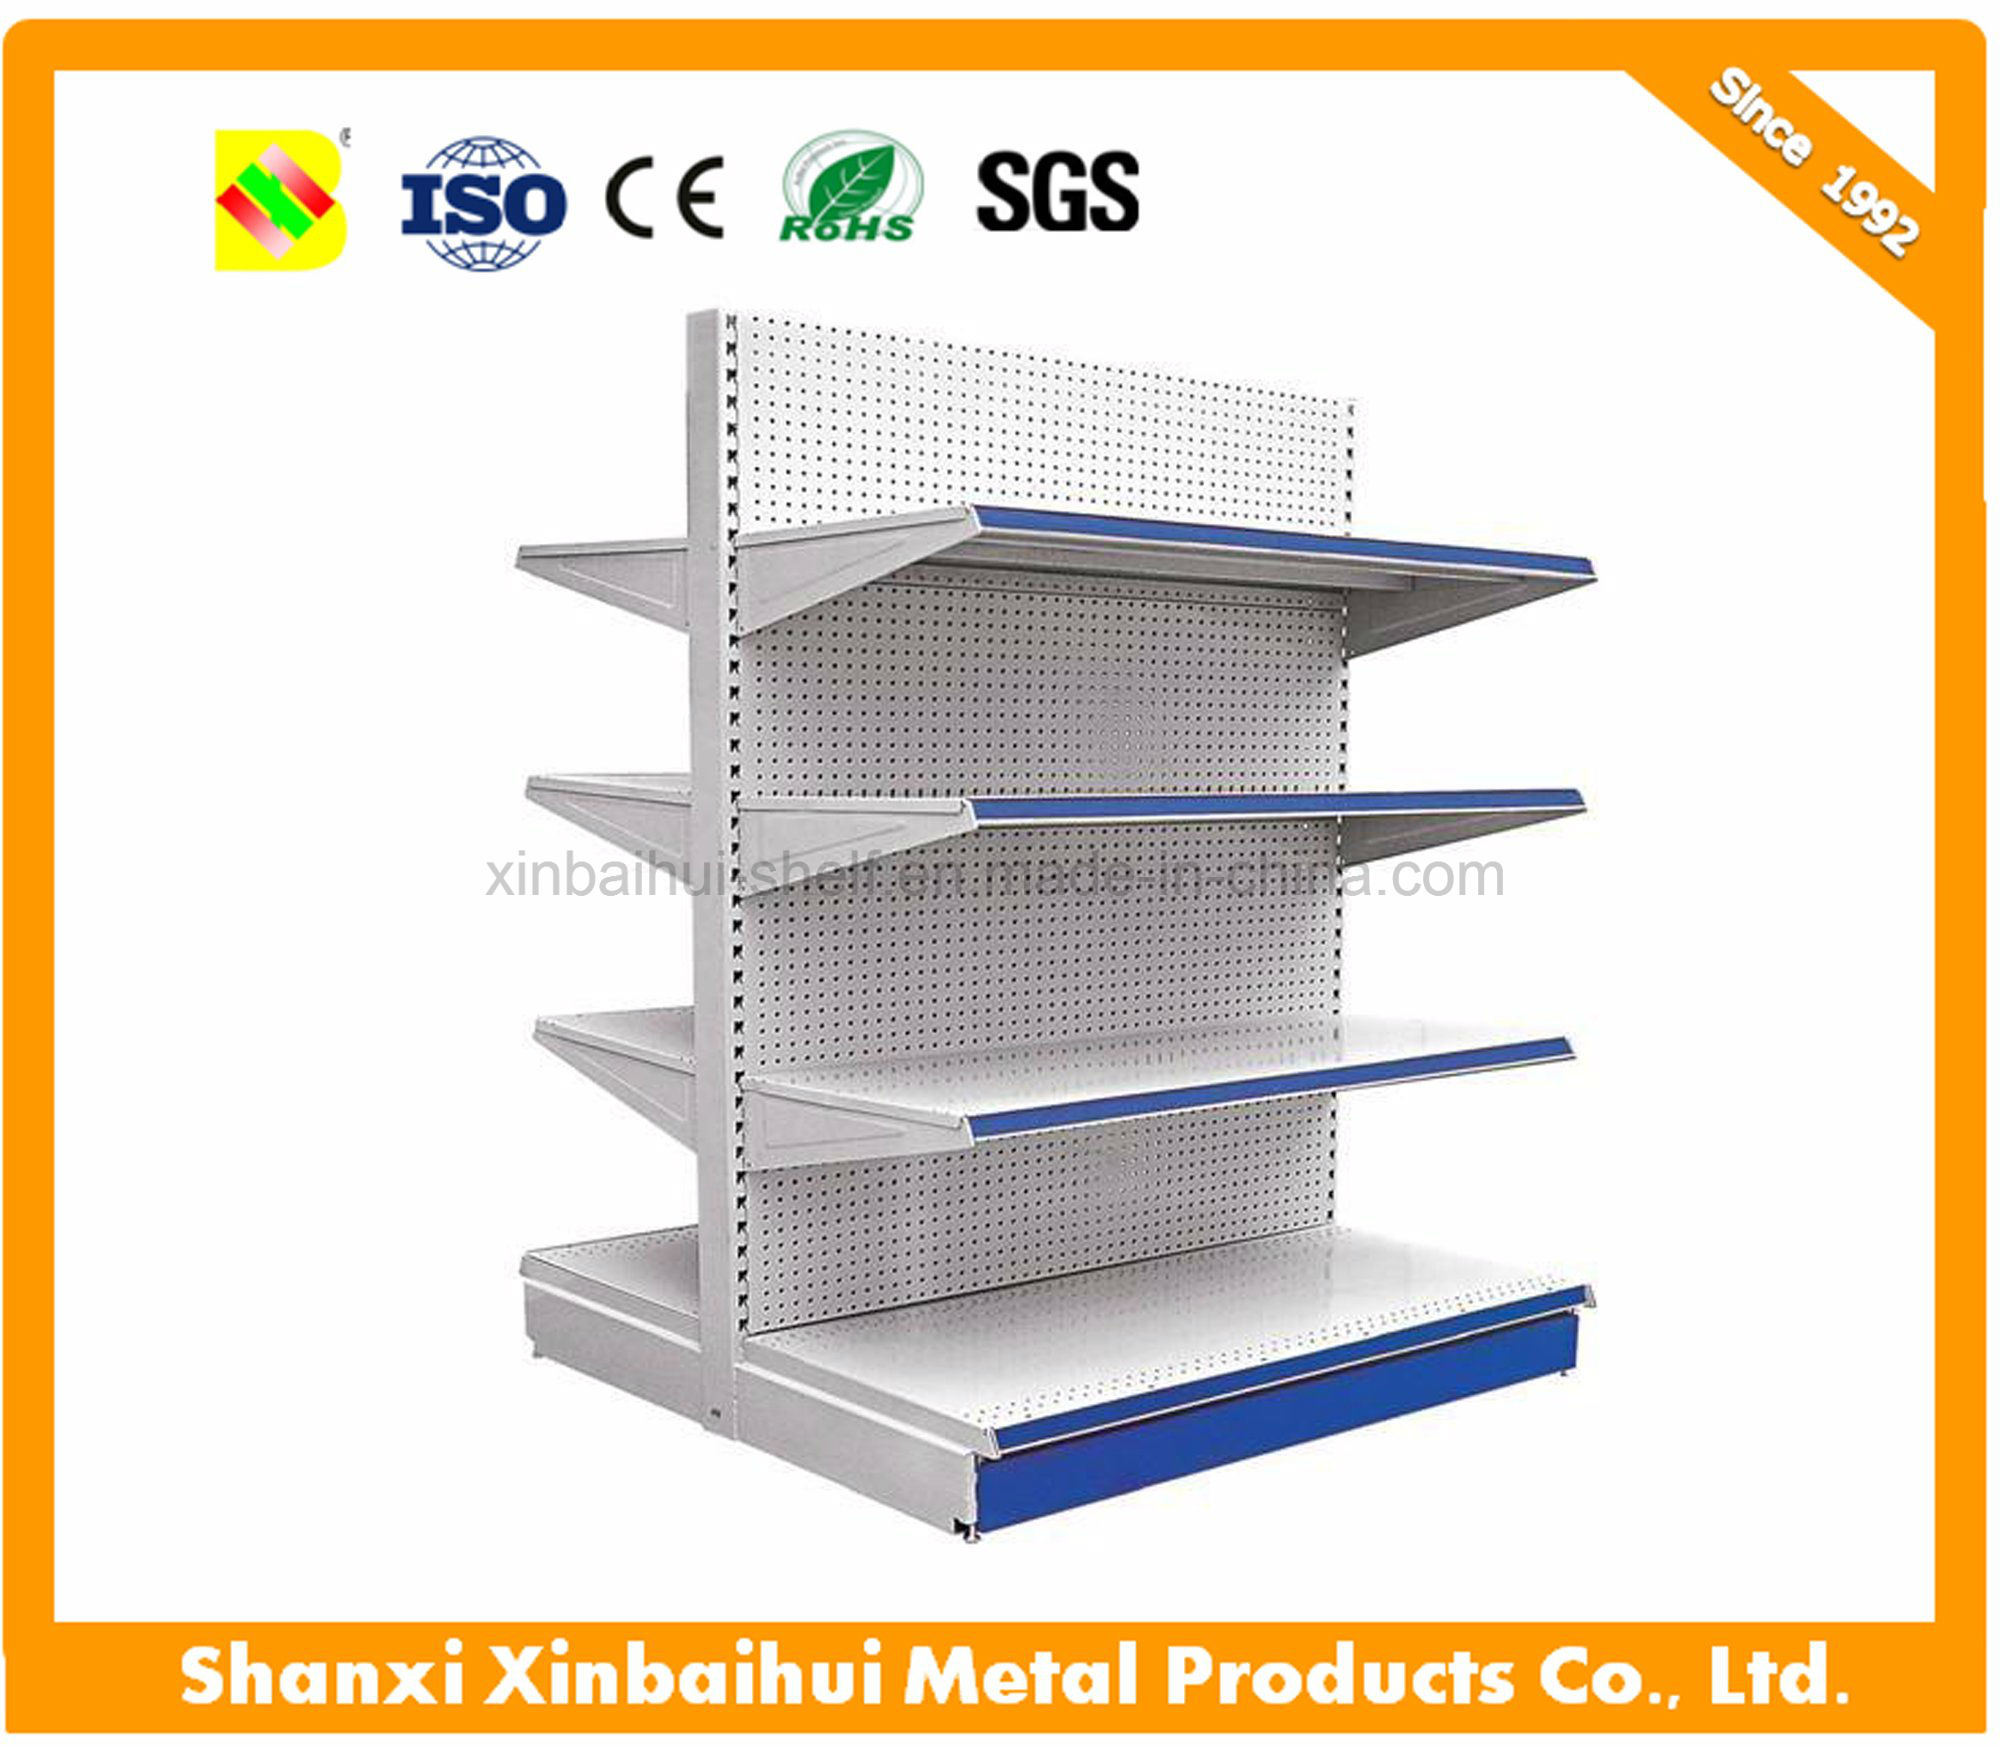 Gondola Shelving for Display Used in Convenience Store and Suppermarket